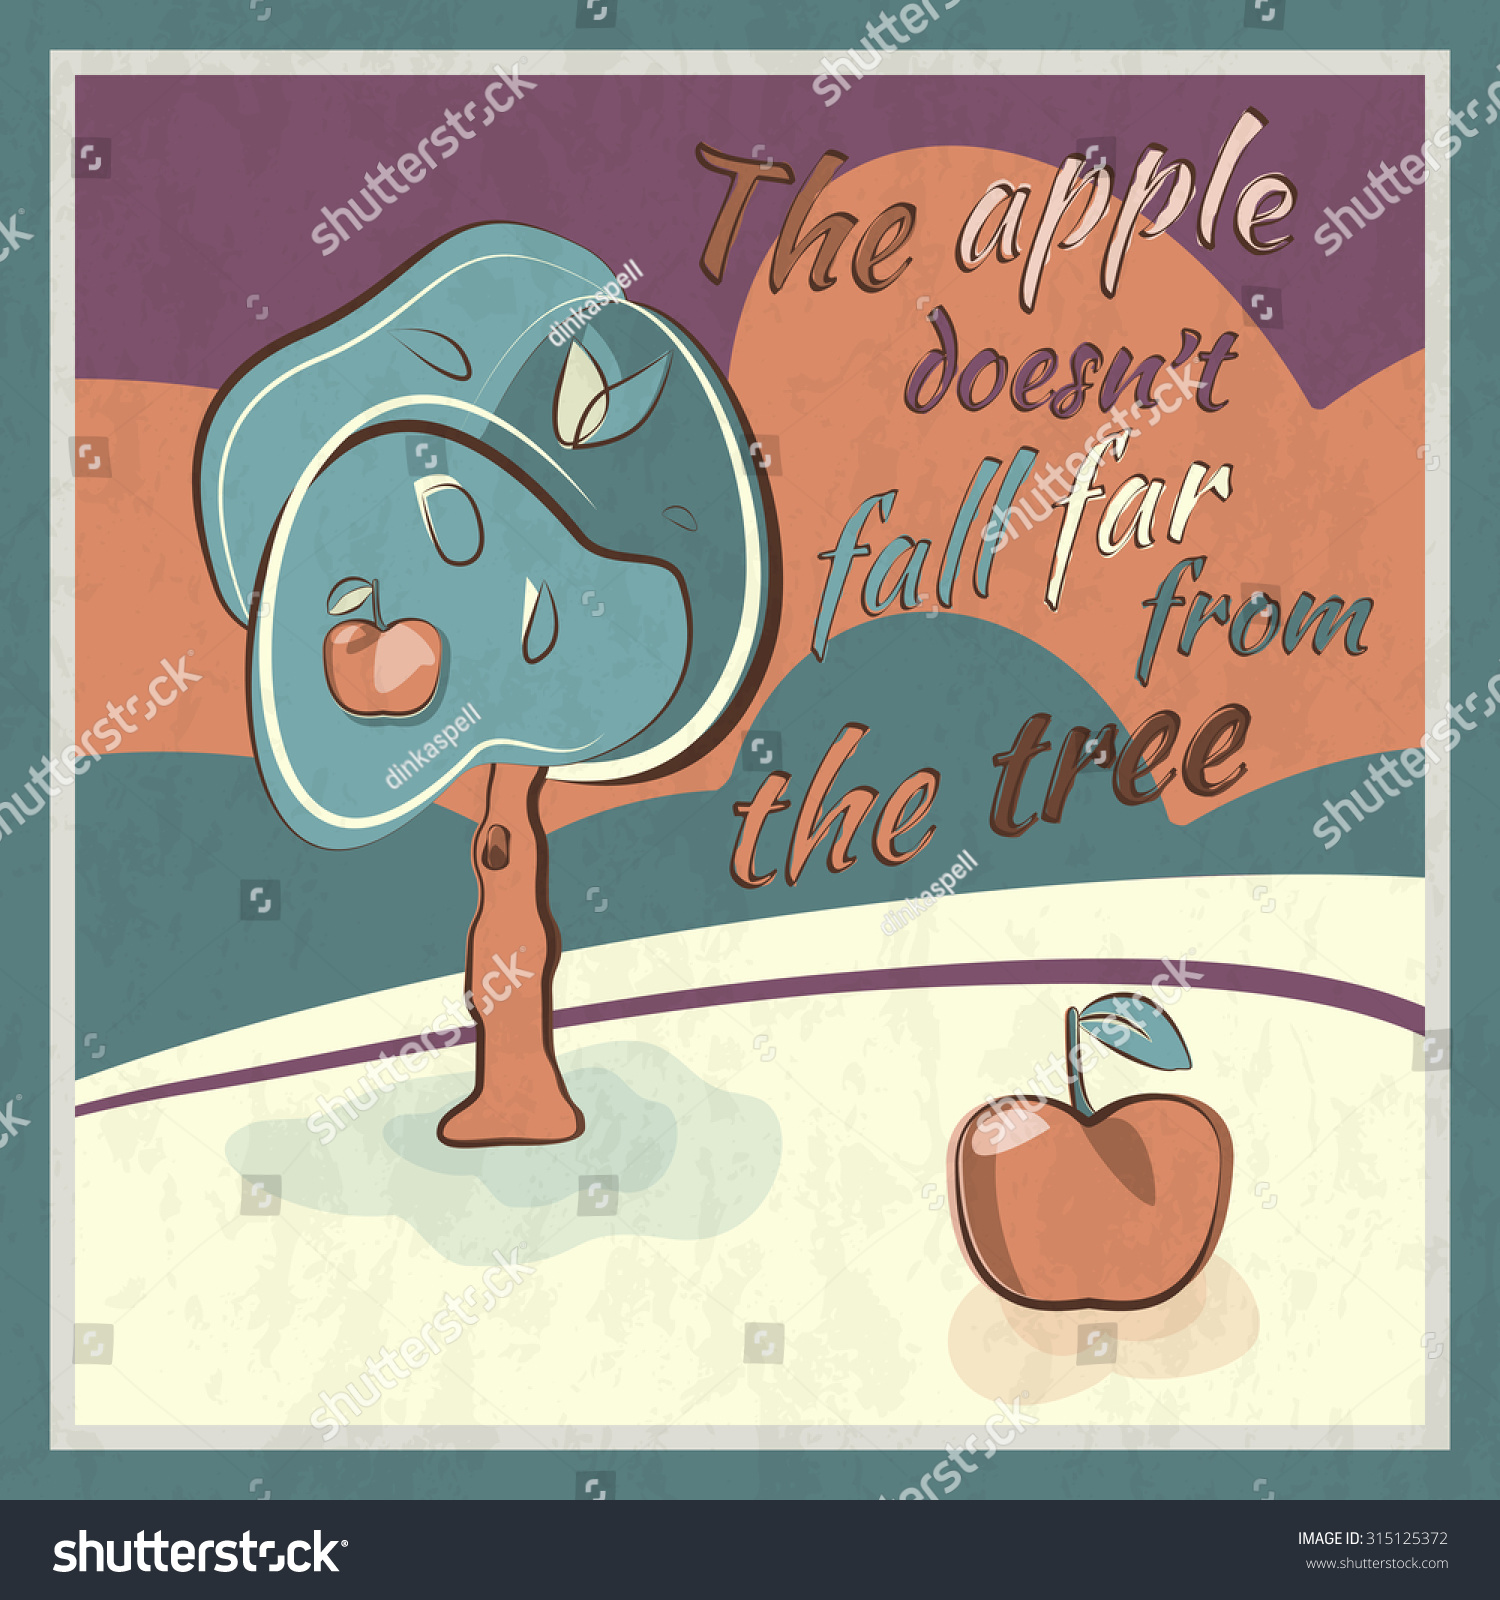 Apple doesn t. The Apple doesn’t Fall far from the Tree. Идиома the Apple never Falls far from the Tree. The Apple doesn't Fall. Idiom an Apple doesn't Fall far from the Tree.